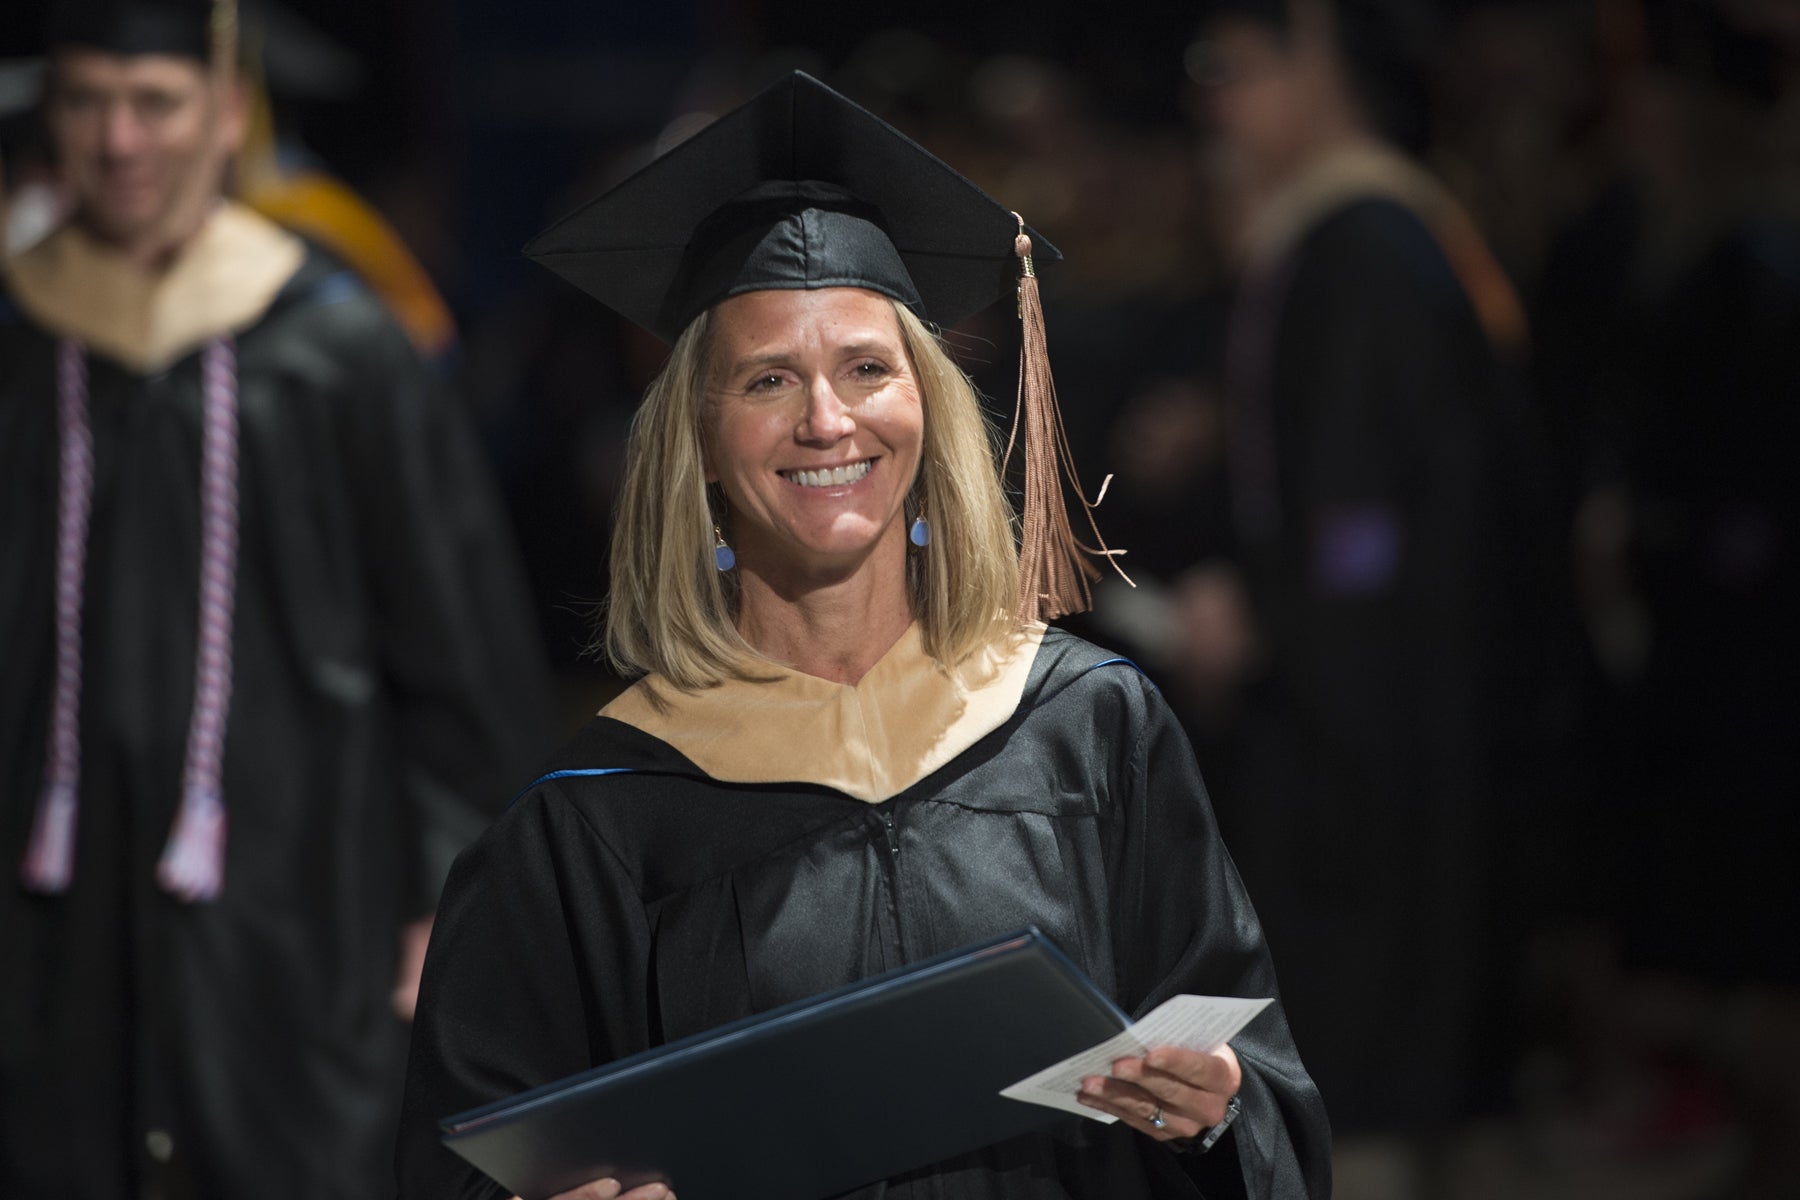 MBA student receiving diploma at commencement